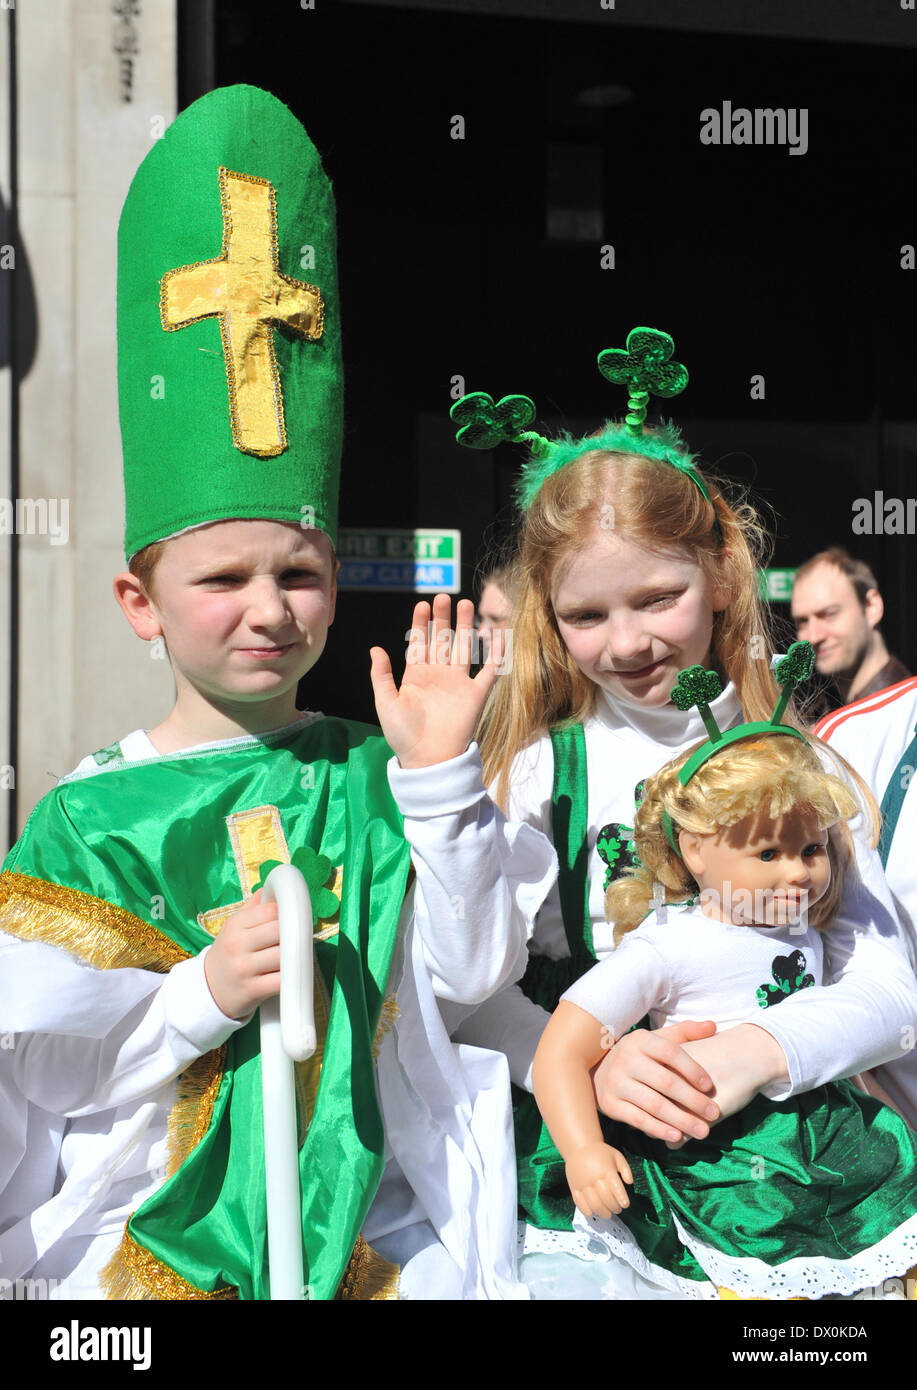 Piccadilly, London, UK. 16th March 2014.  A young boy dressed as St Patrick at the St Patrick's Day Parade in London. Credit:  Matthew Chattle/Alamy Live News Stock Photo